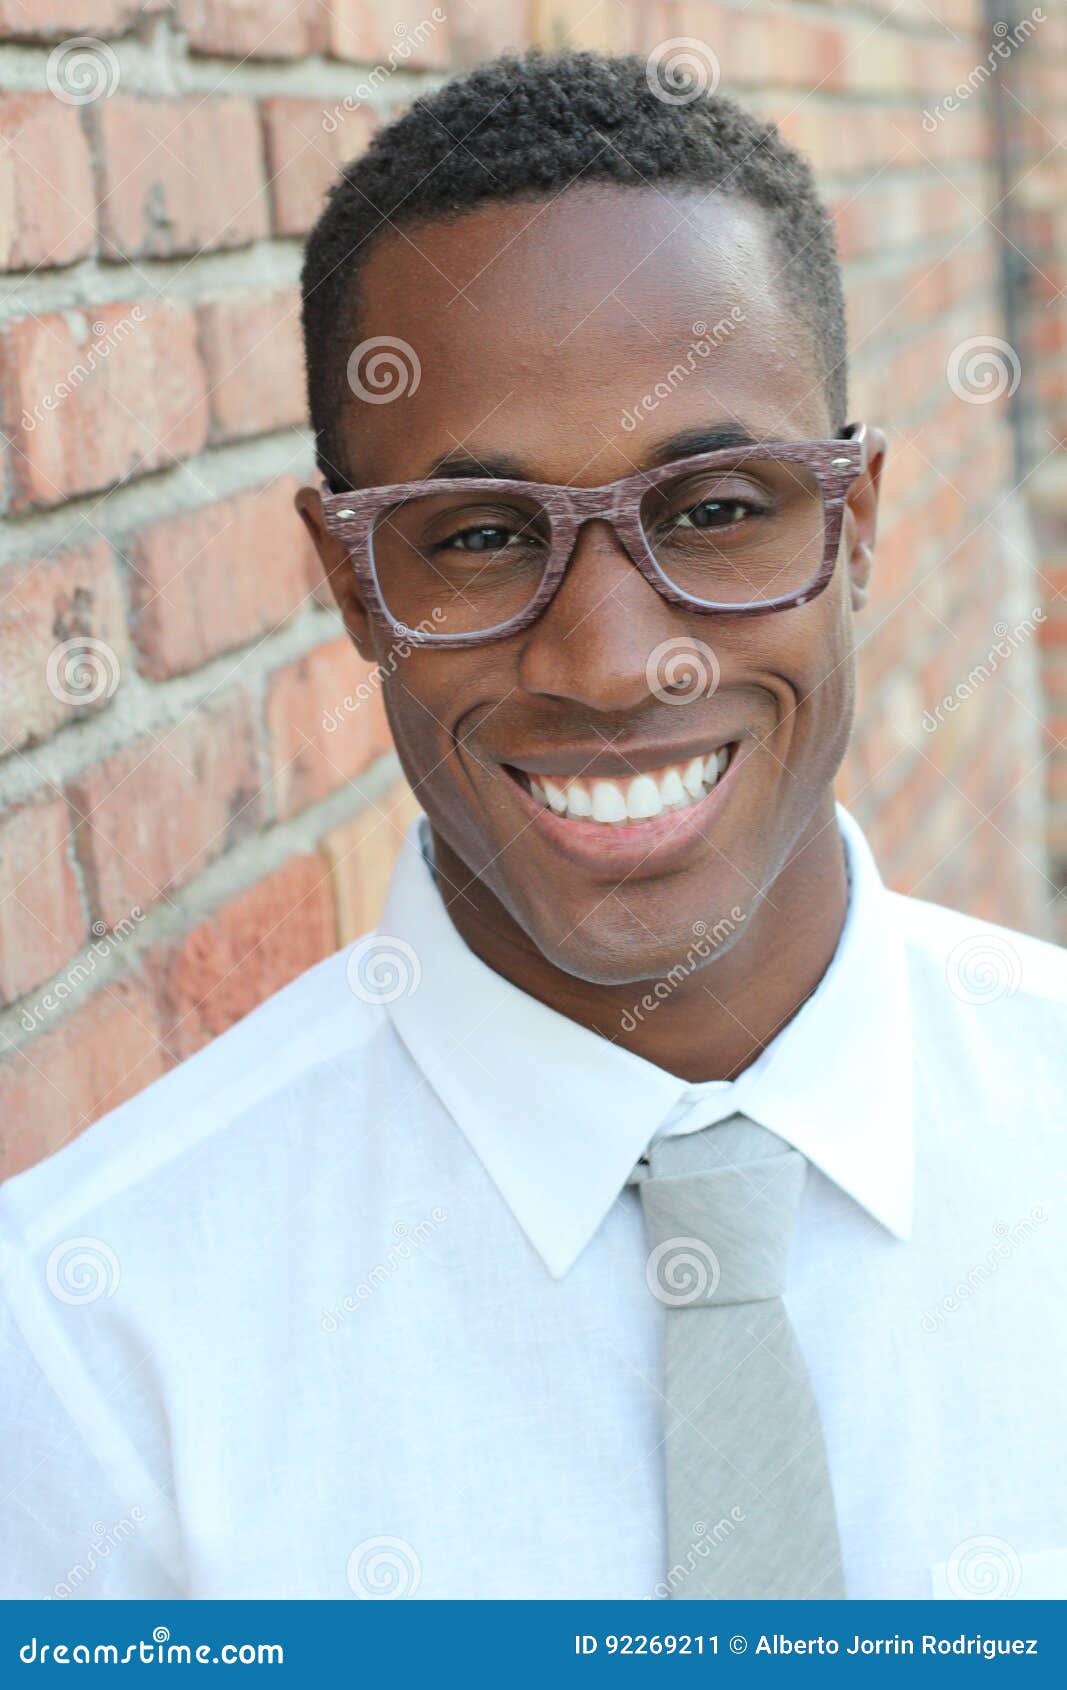 Chaiselong Monica Nordamerika African American Man Wearing Glasses Portrait Stock Image - Image of  blindness, lifestyle: 92269211